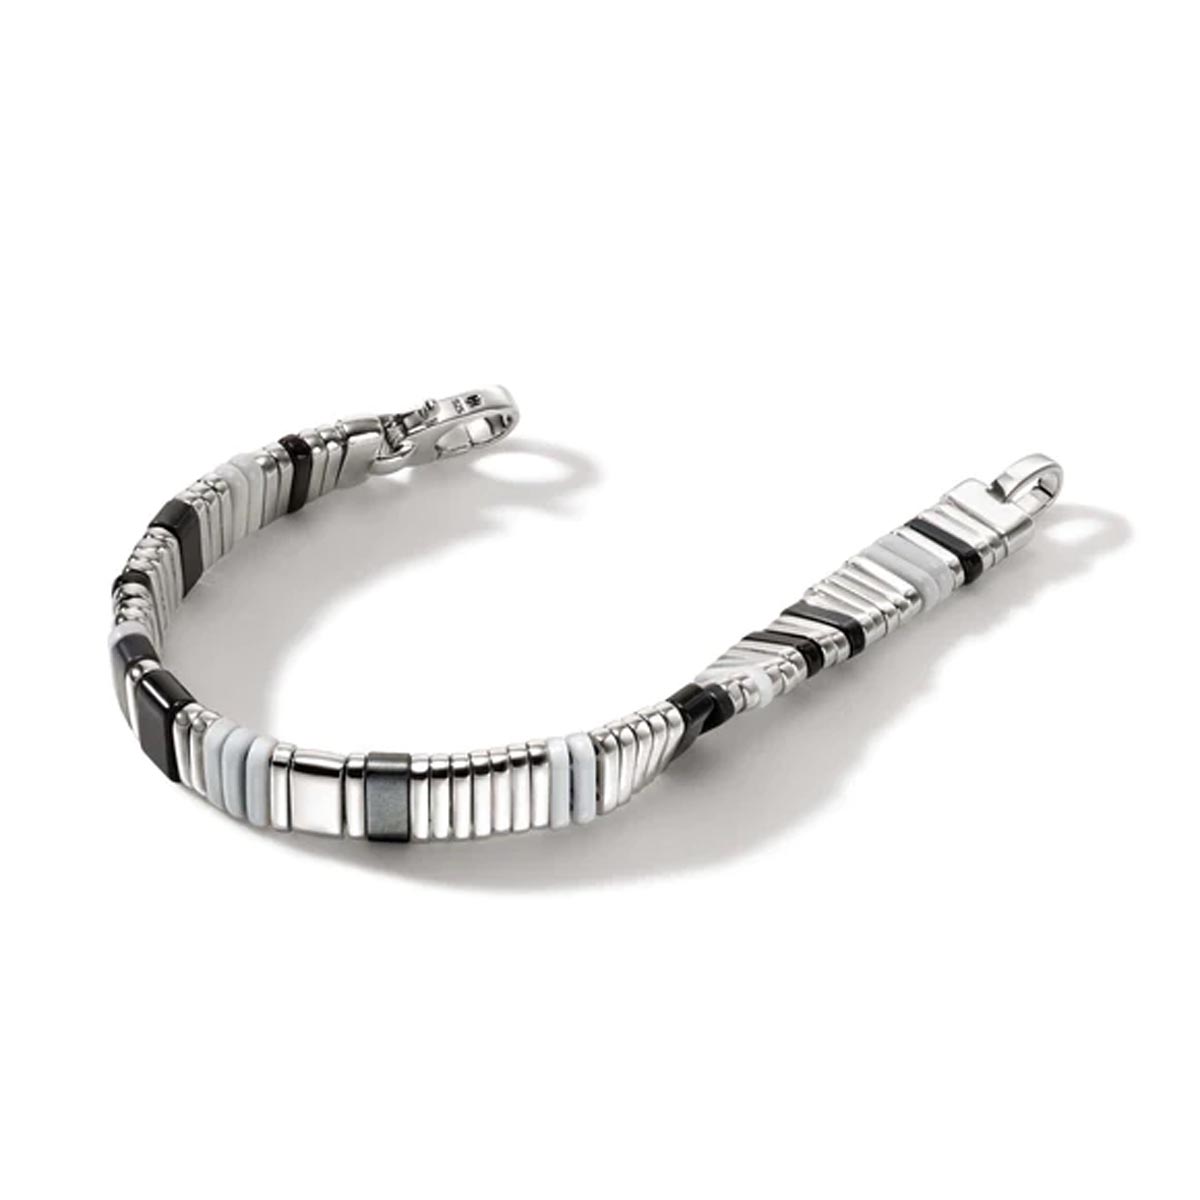 John Hardy Colorblock Collection Hematite and Black Onyx Bead Bracelet in Sterling Silver with White Enamel